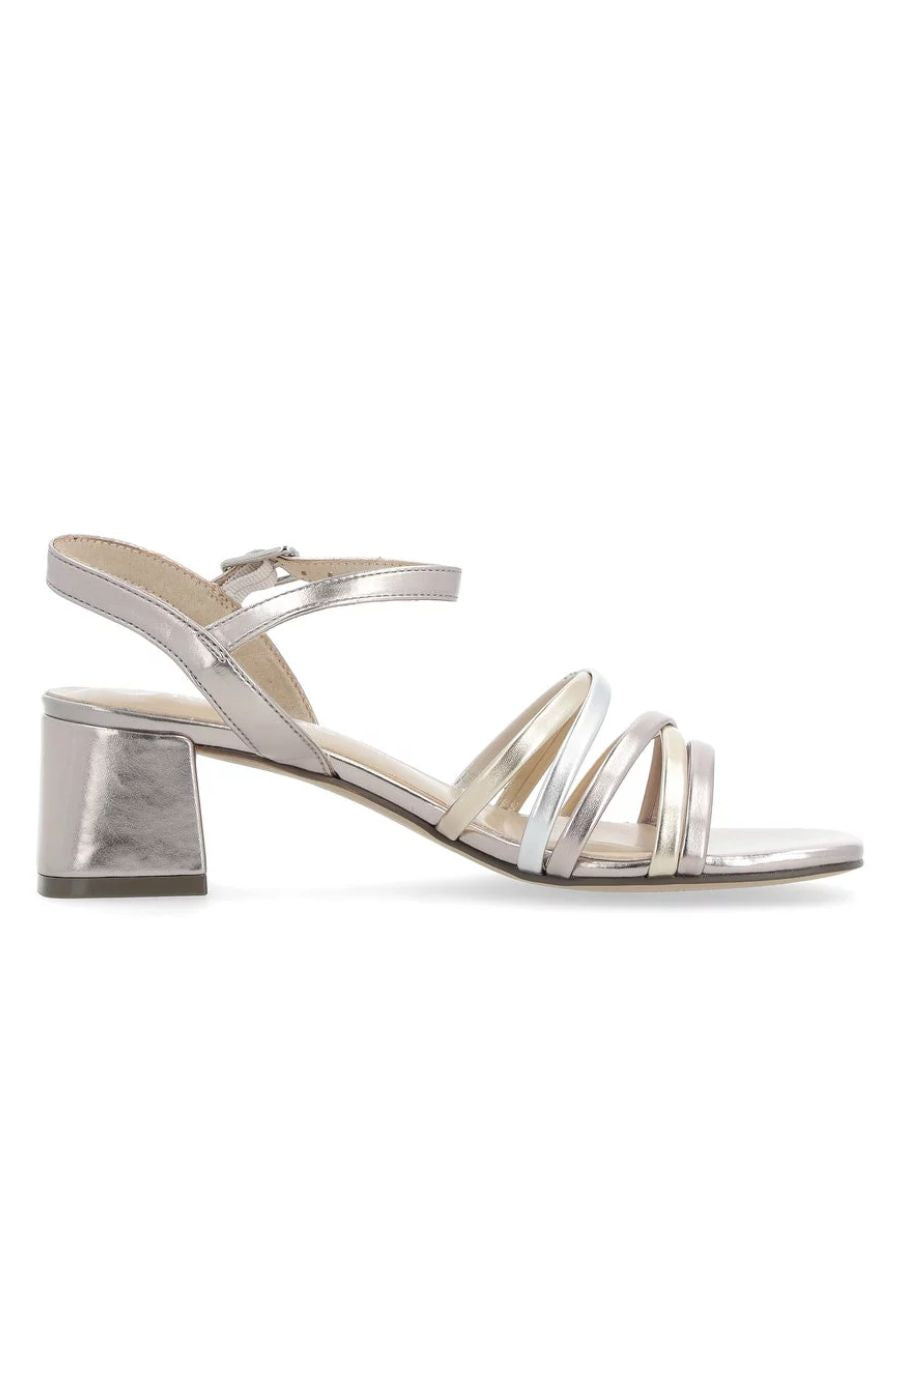 Remonte Strappy Sandal in Metallic